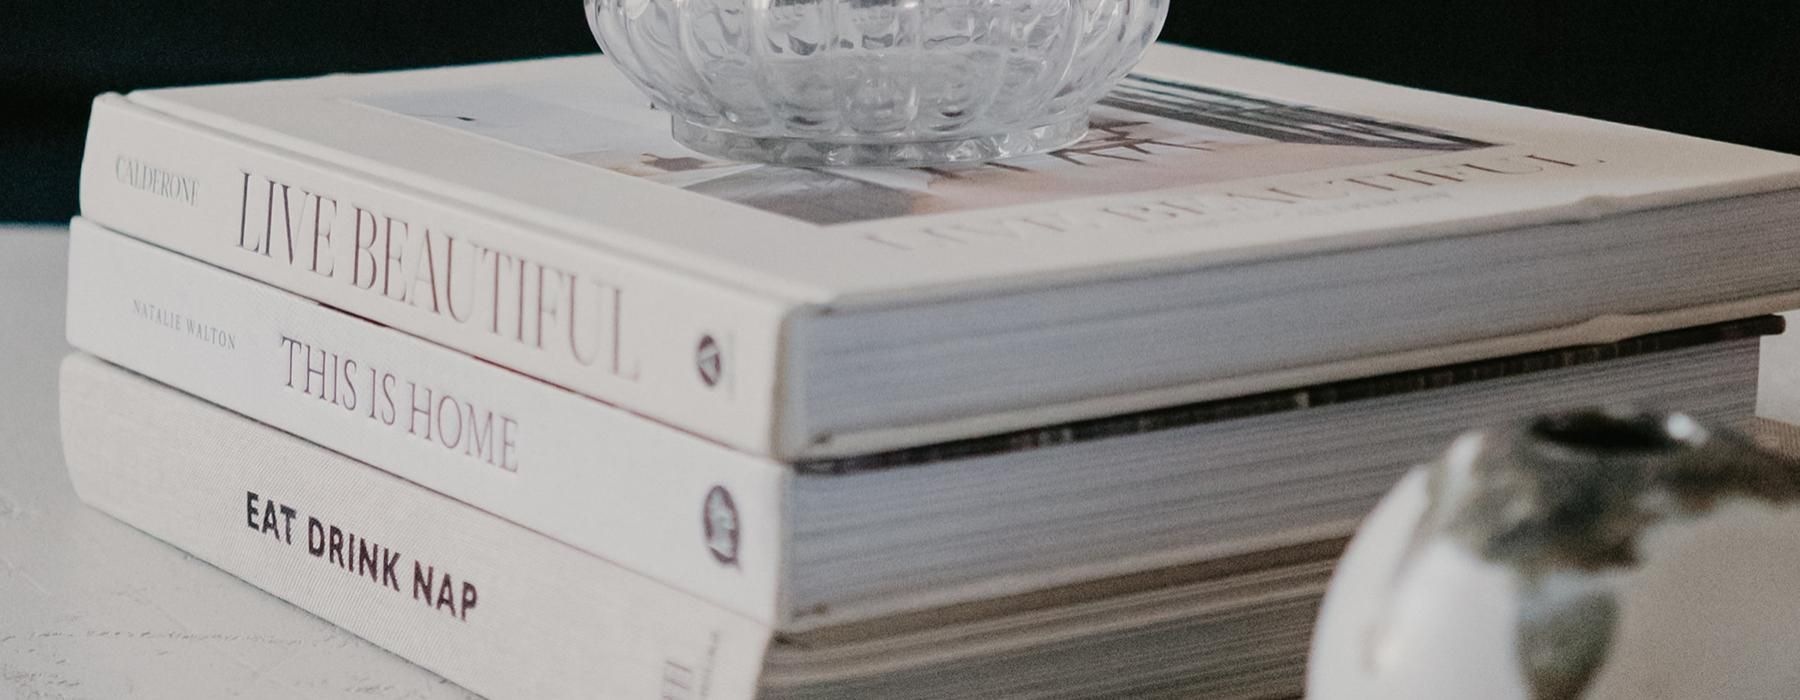 a stack of books and vases on a table top